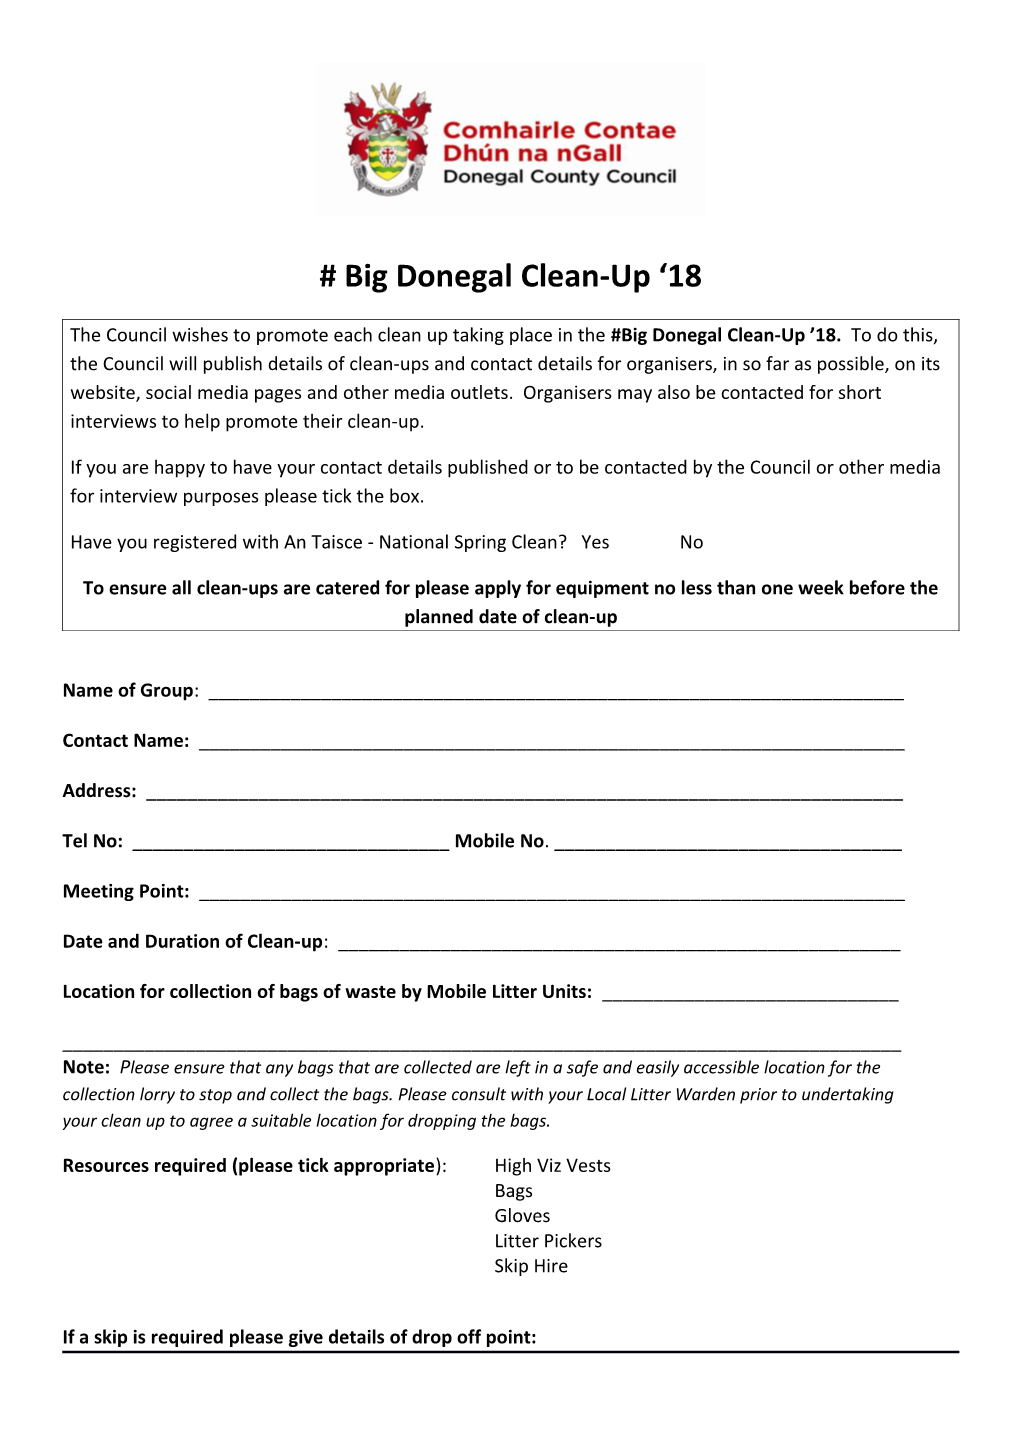 Big Donegal Clean-Up 18